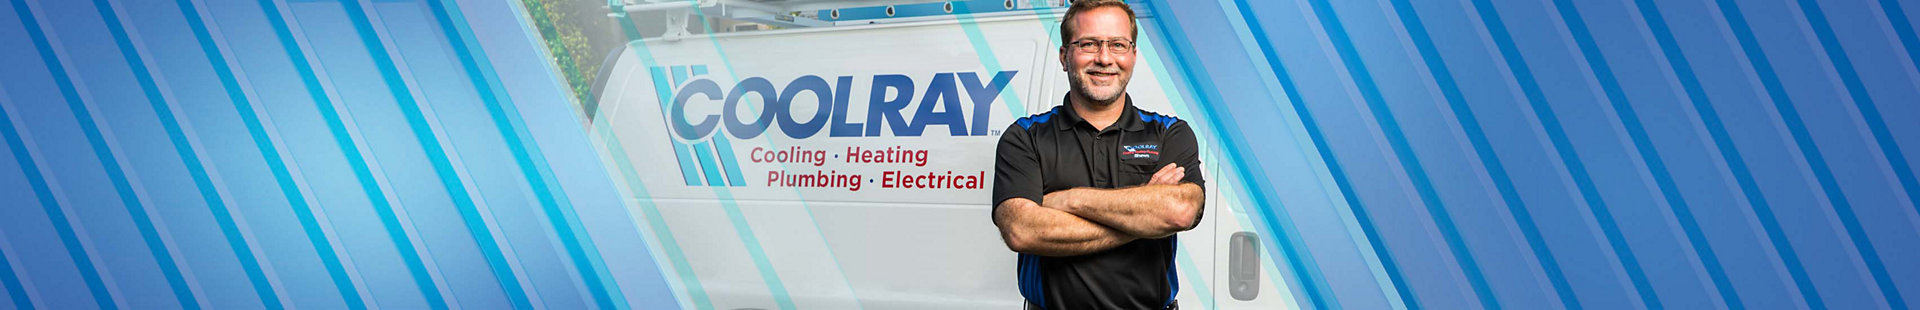 Coolray AC technician and service vehicle